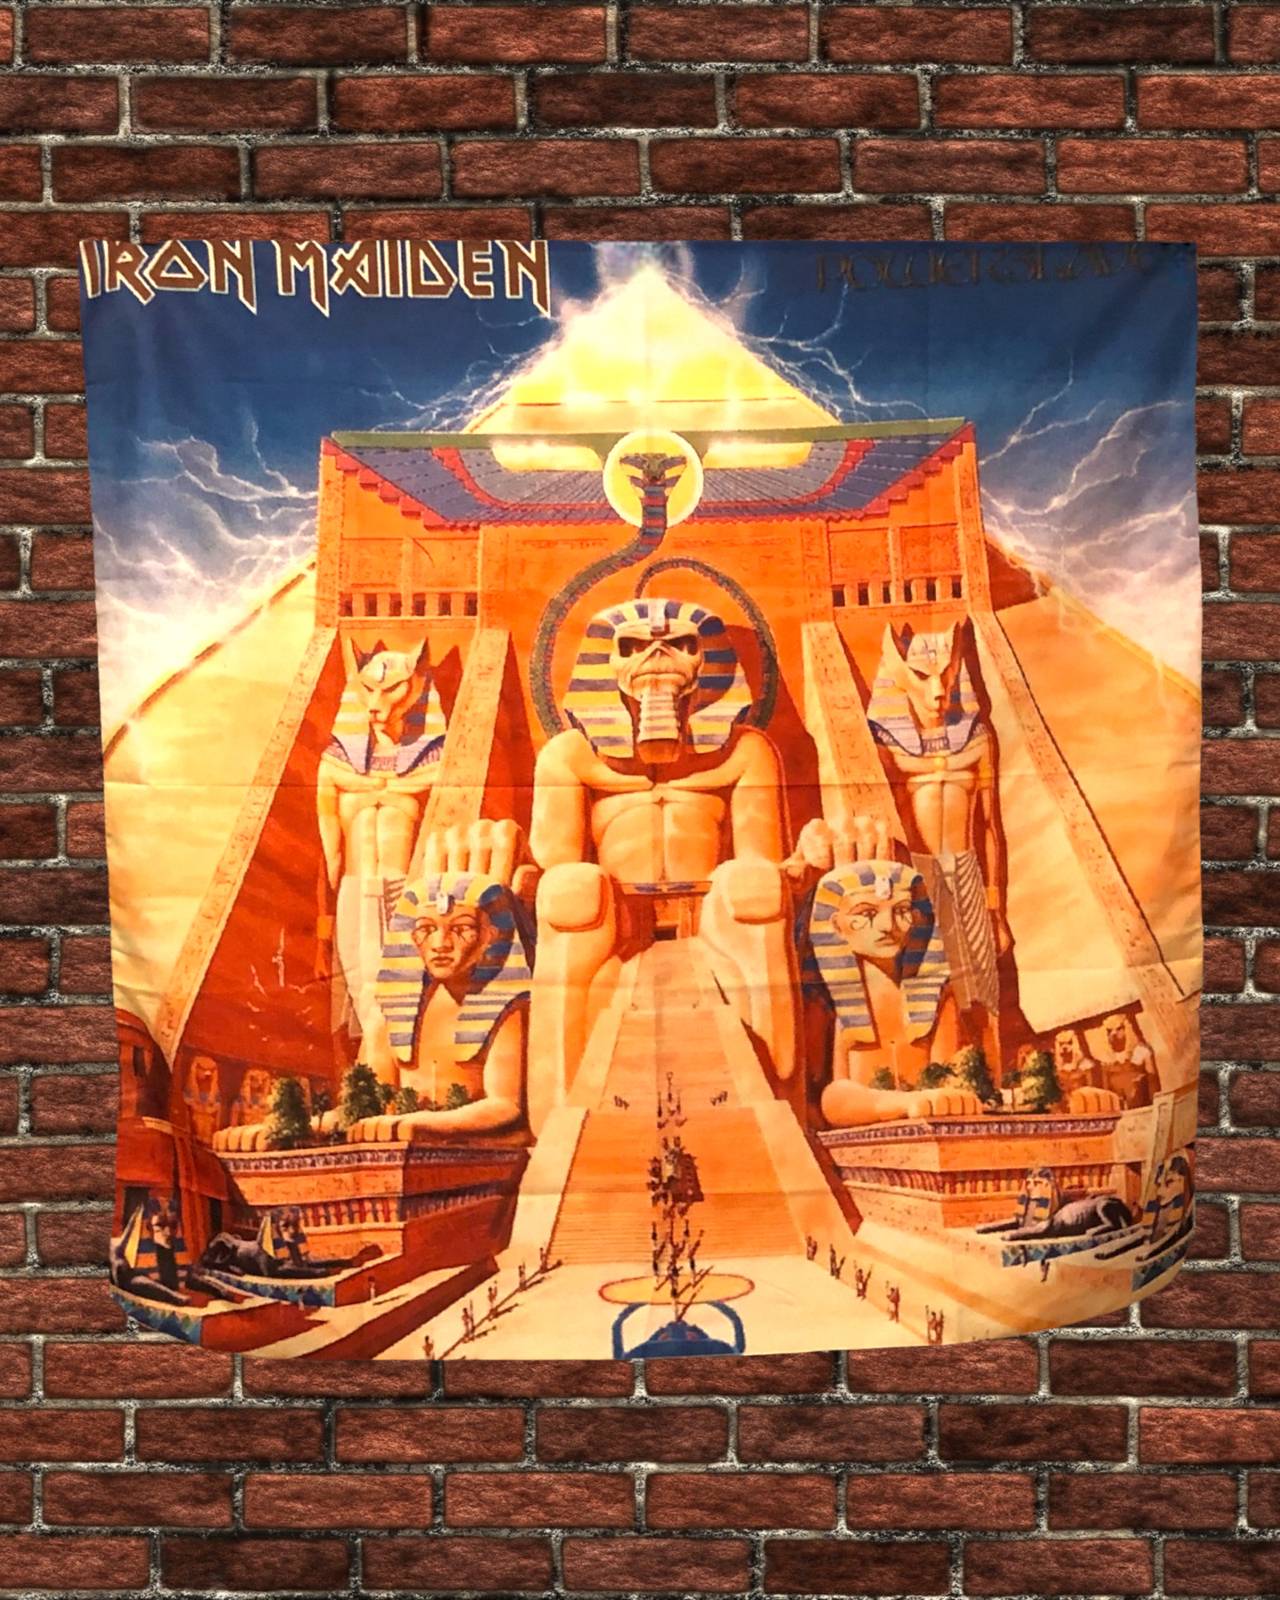 48" x 48" Iron Maiden Tapestry Wall Hanging Décor